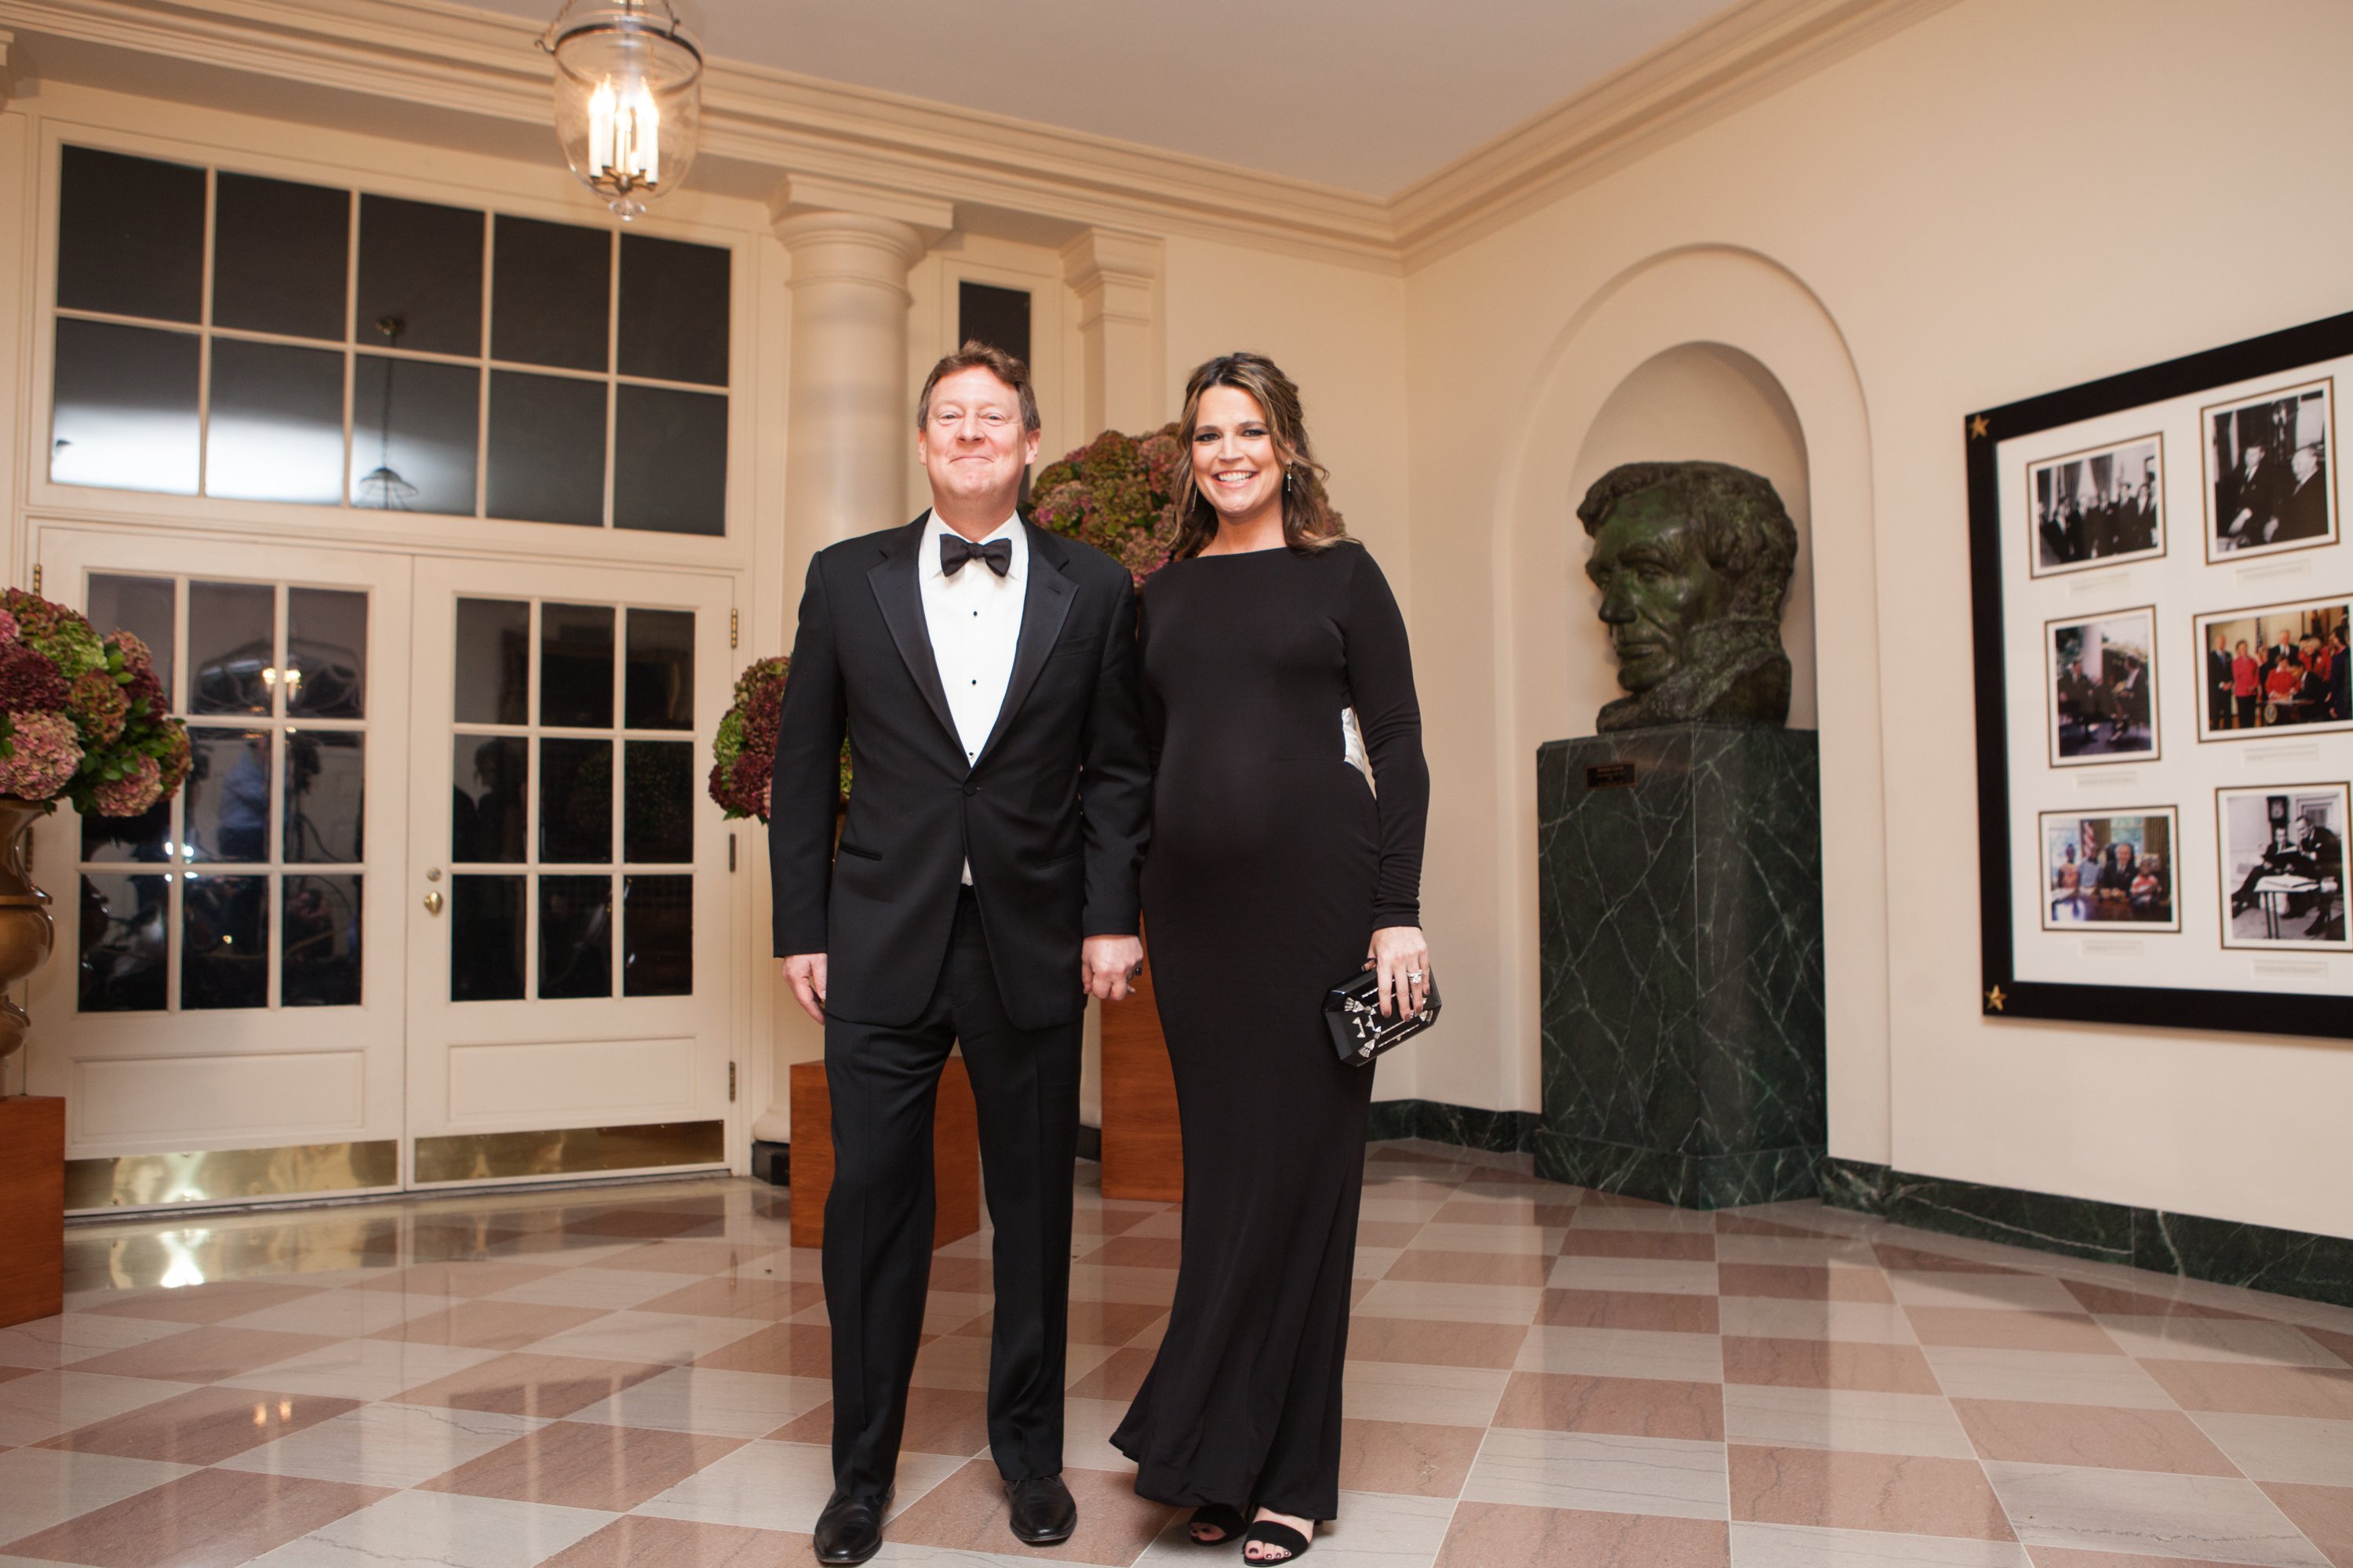 Savannah Guthrie and her husband Michael Feldman, arrive at the White House in Washington, DC, USA on 18 October 2016 | Source: Getty Images